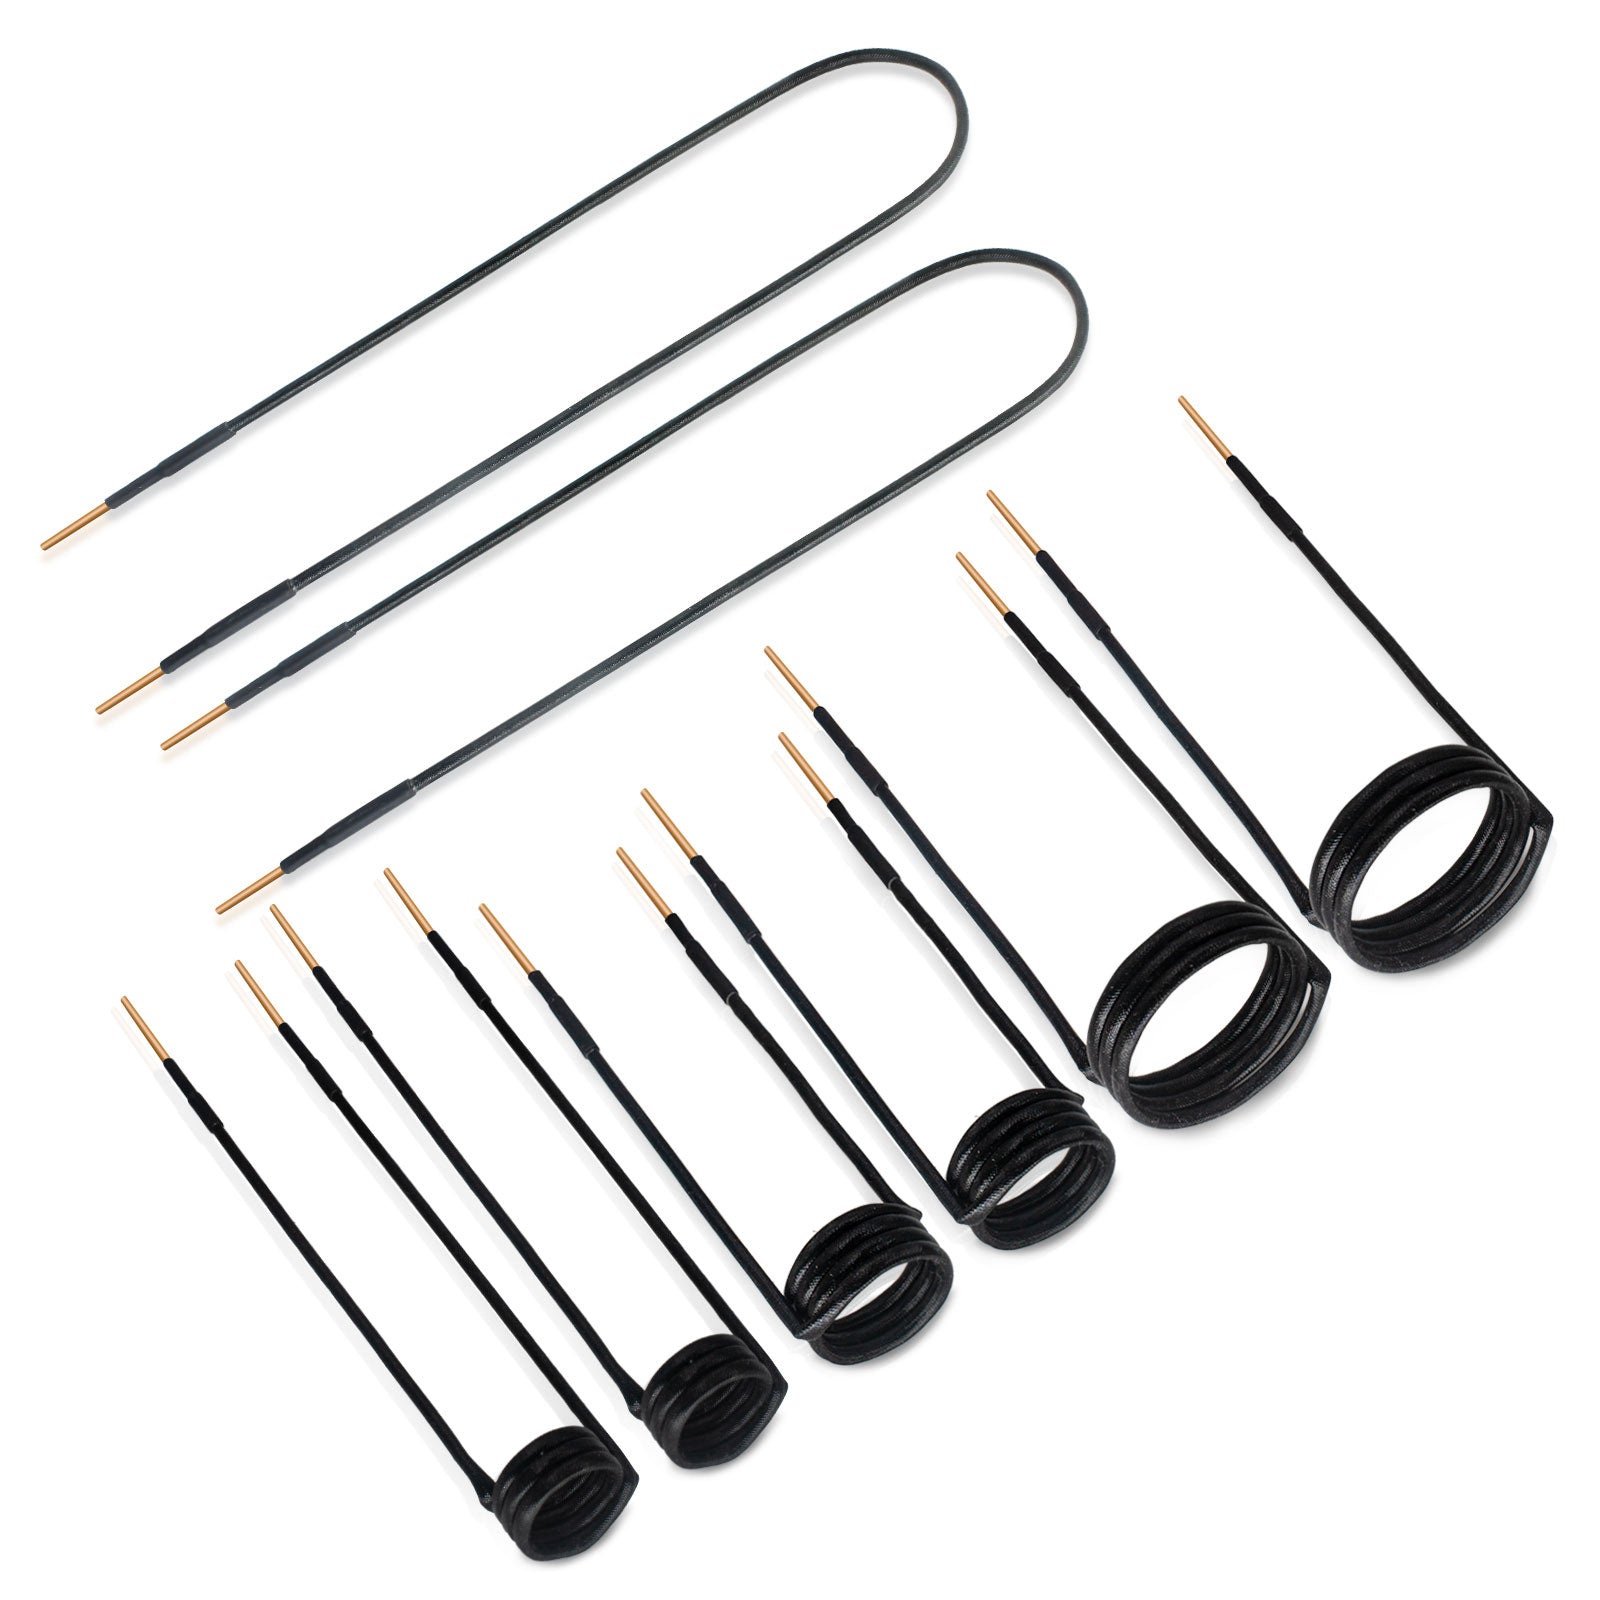 Magnetic Induction Heater Coil Kit - 8PCS Flameless Induction Heat Accessor for Removing Rusty Bolts and Nuts - Auto Body Collision Repair Welding Products